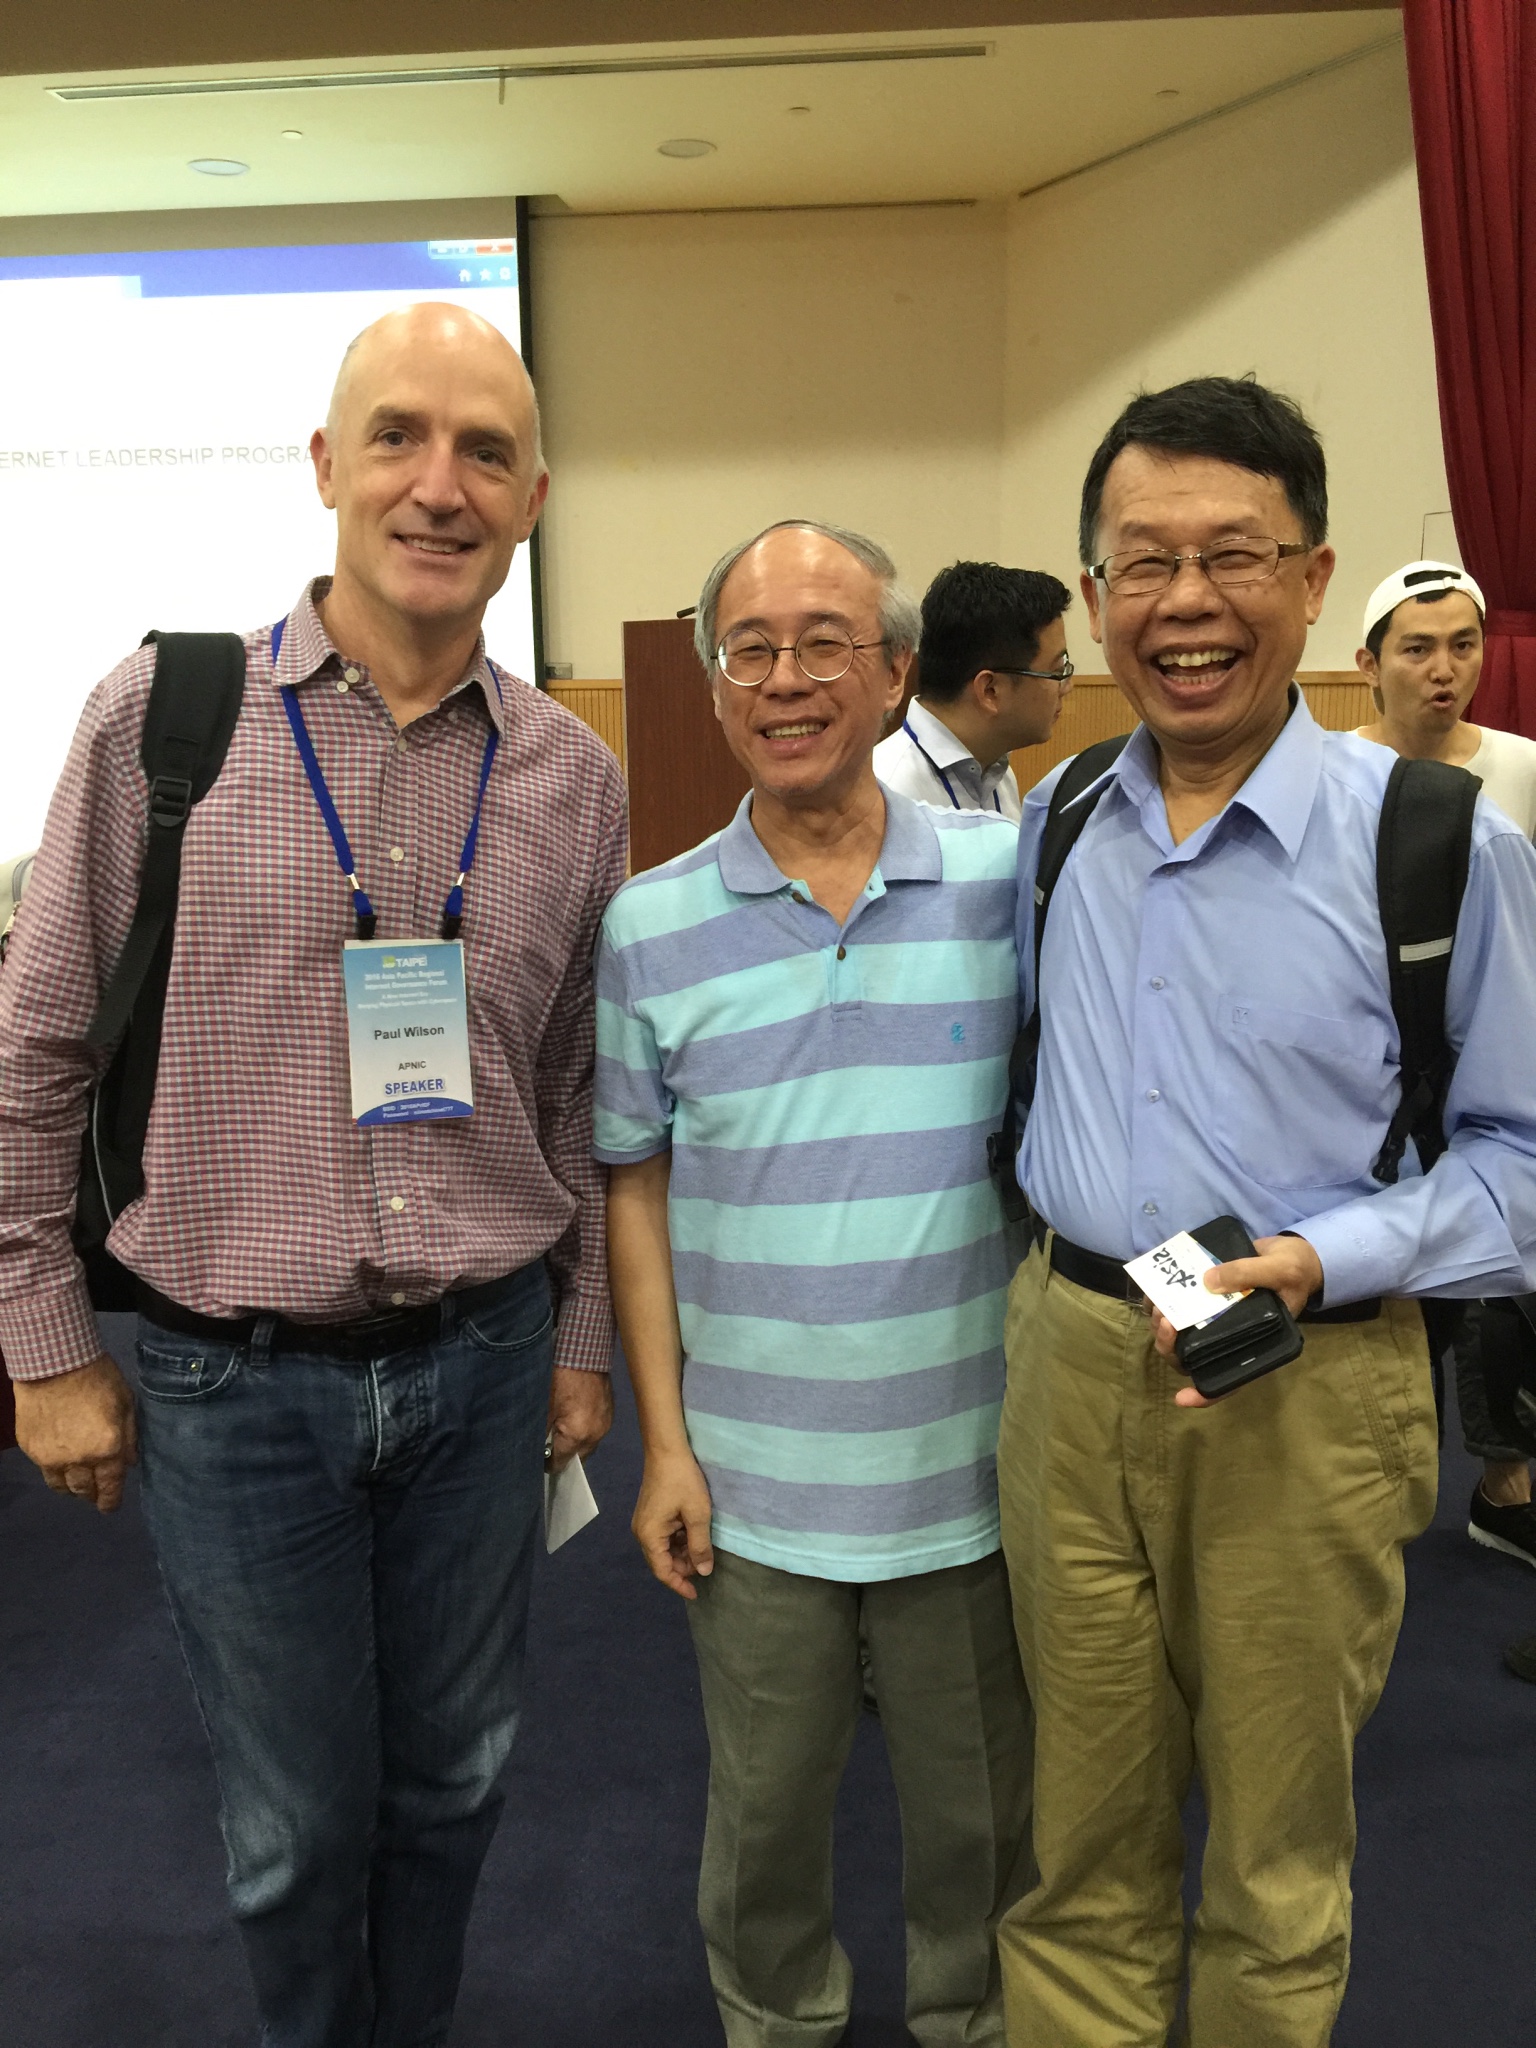 From right: Vincent Chen with Kuo-Wei Wu of NIIEPA, and APNIC Director General Paul Wilson.